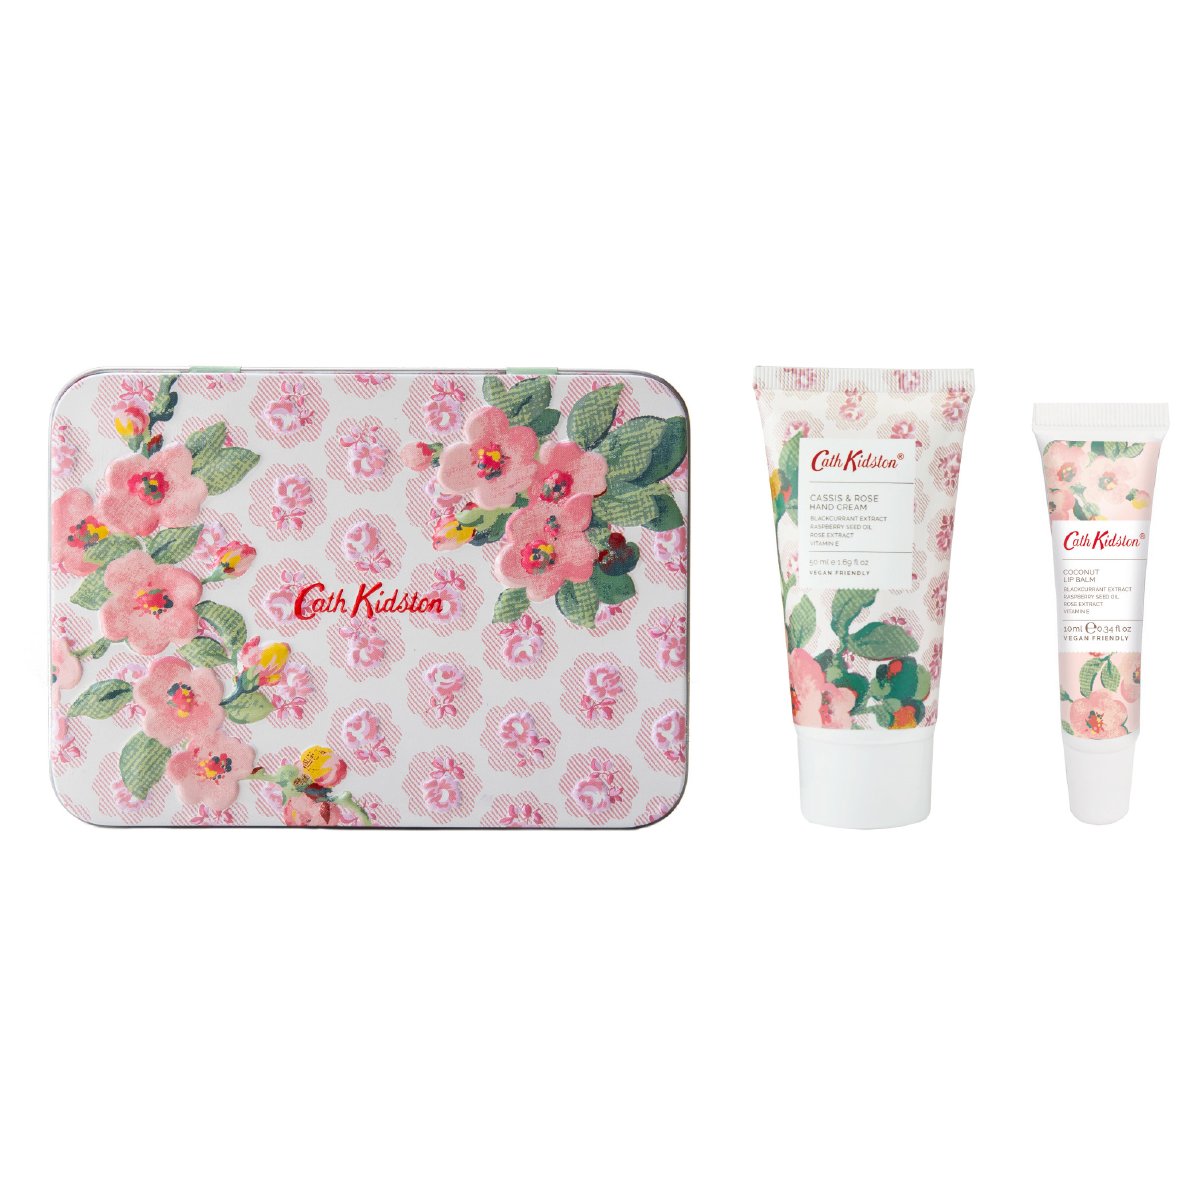 Cath Kidston Freston Cassis And Rose Duo Giftset A